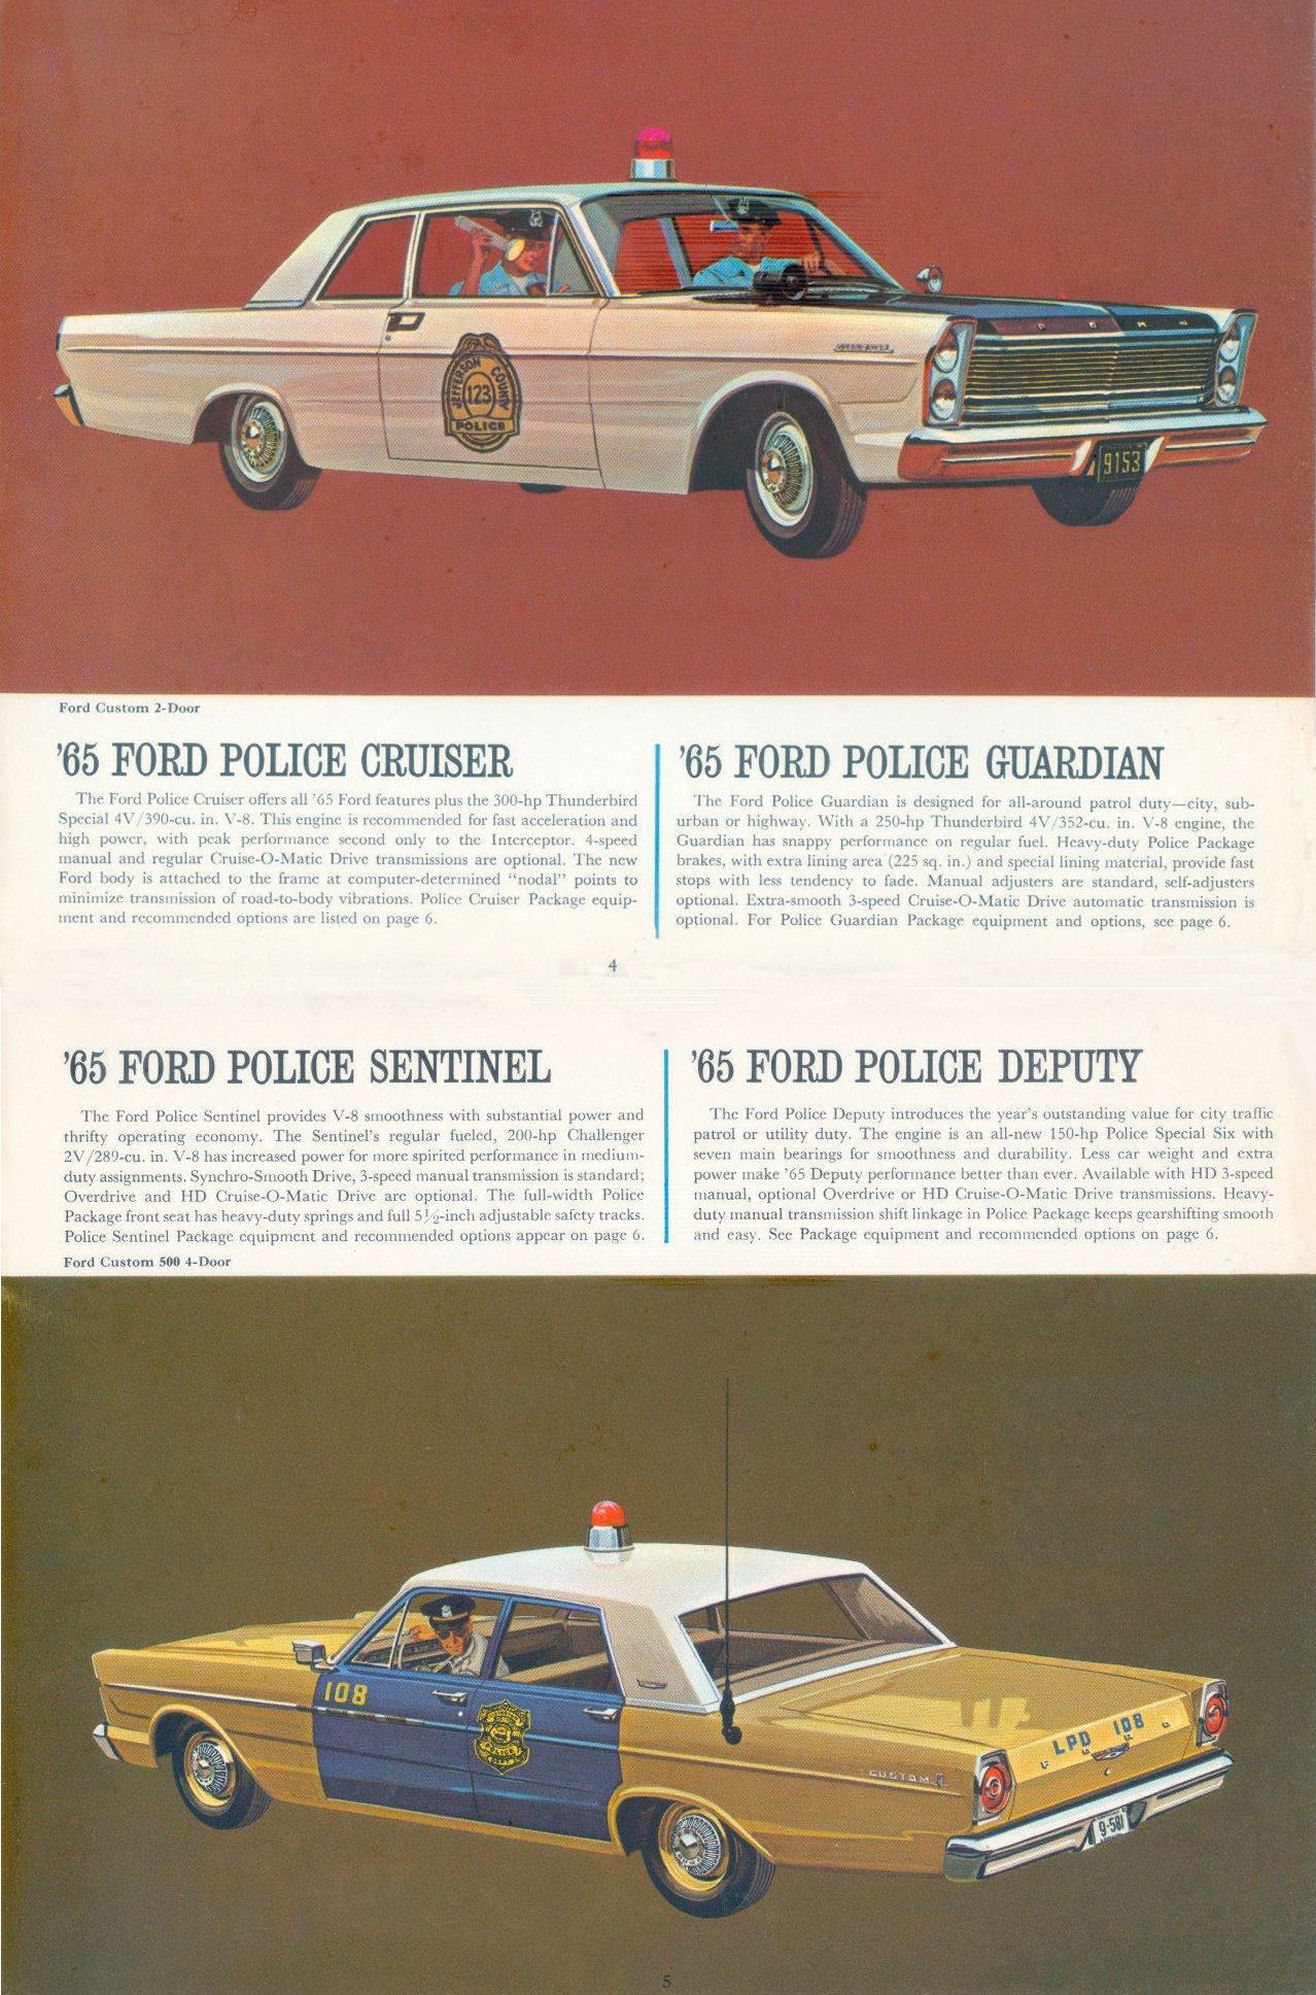 1965_Ford_Police_Cars-04-05